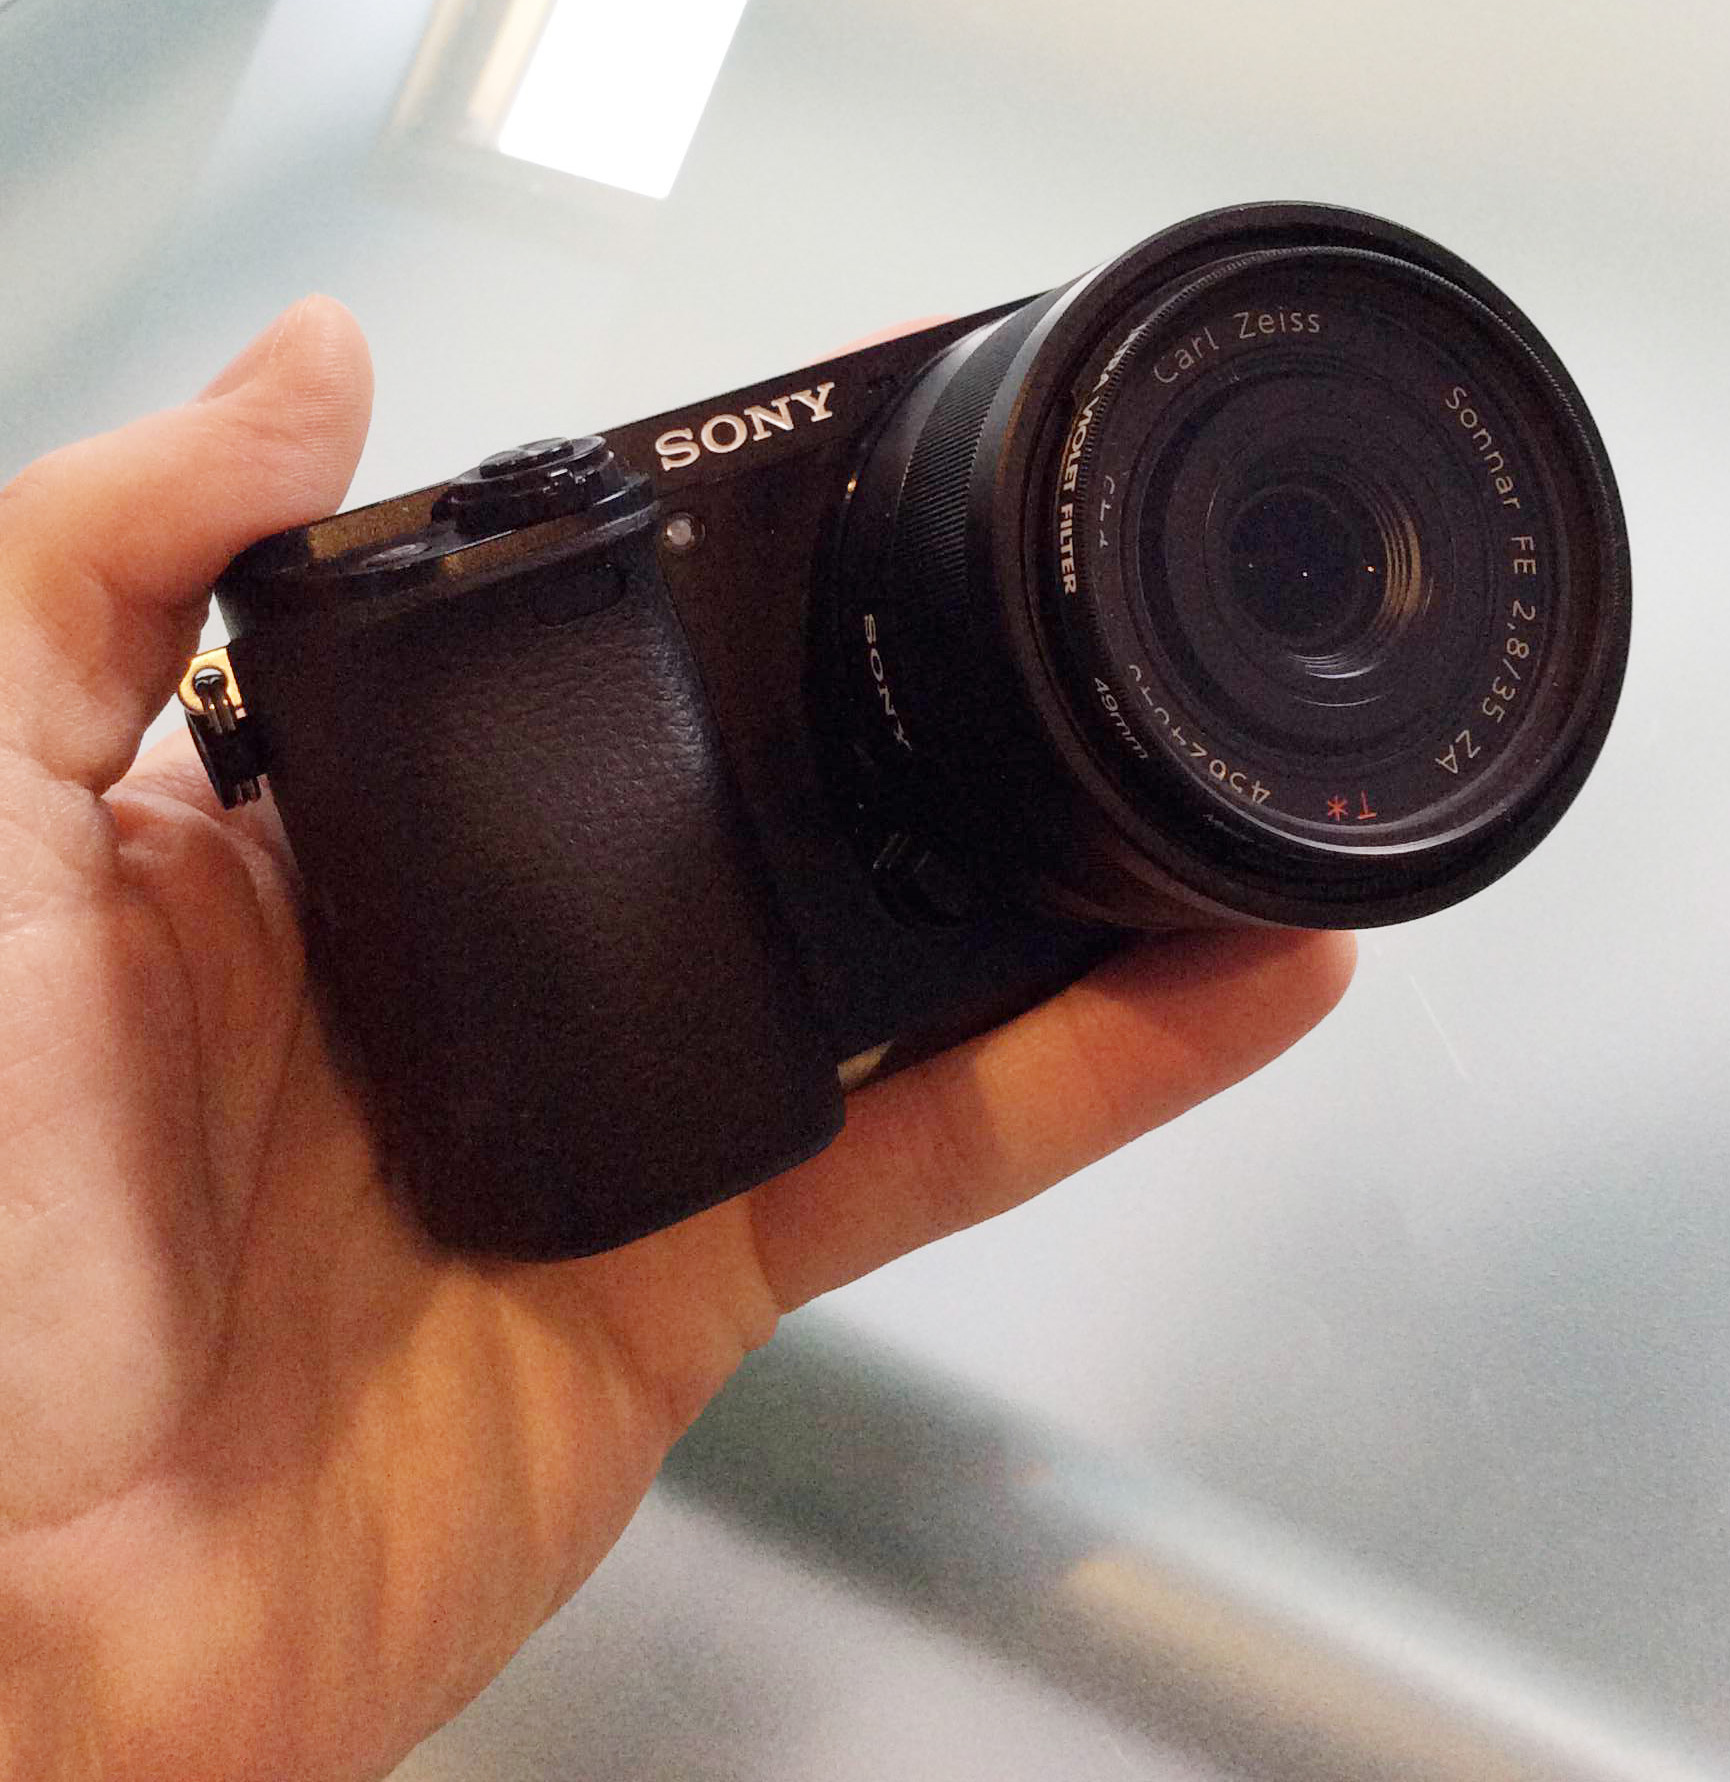 THE SONY a6000 - FULL REVIEW AND OWNER / USER EXPERIENCE 